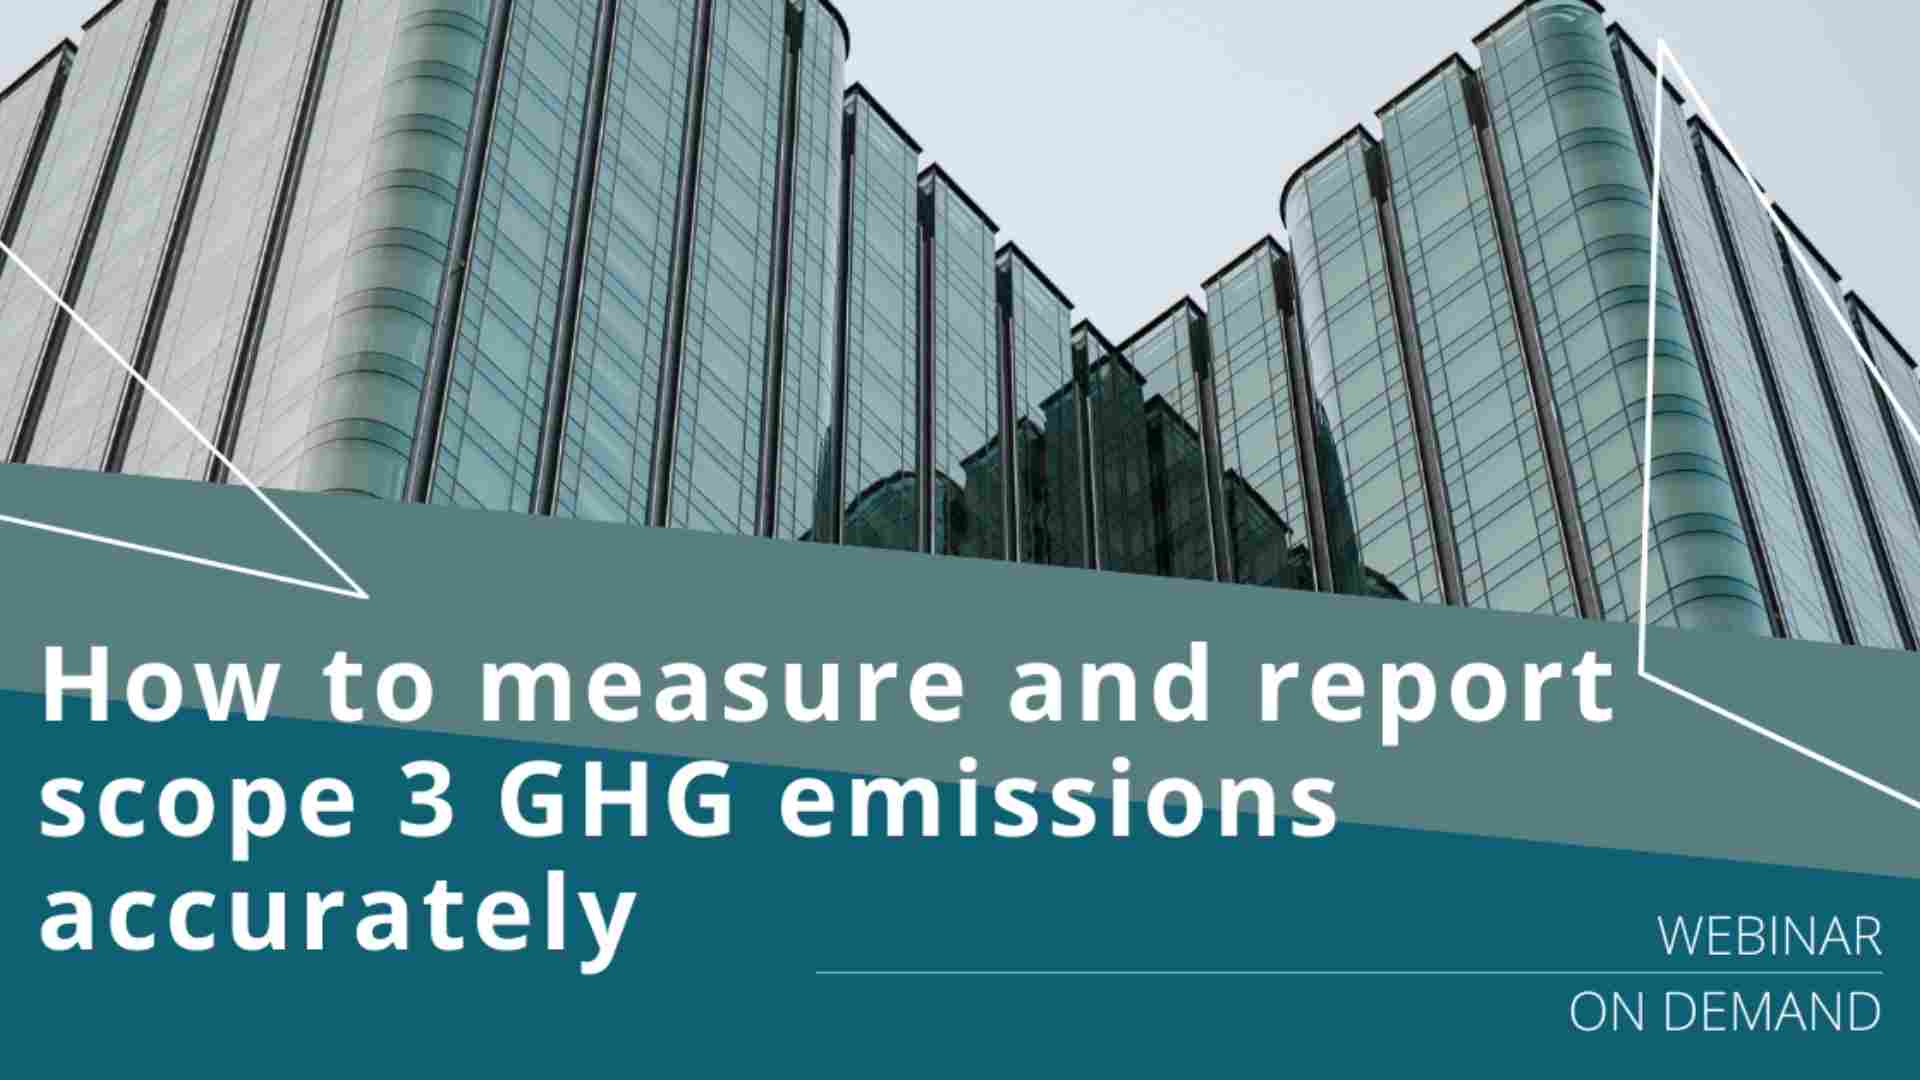 How to measure and report Scope 3 GHG emissions accurately